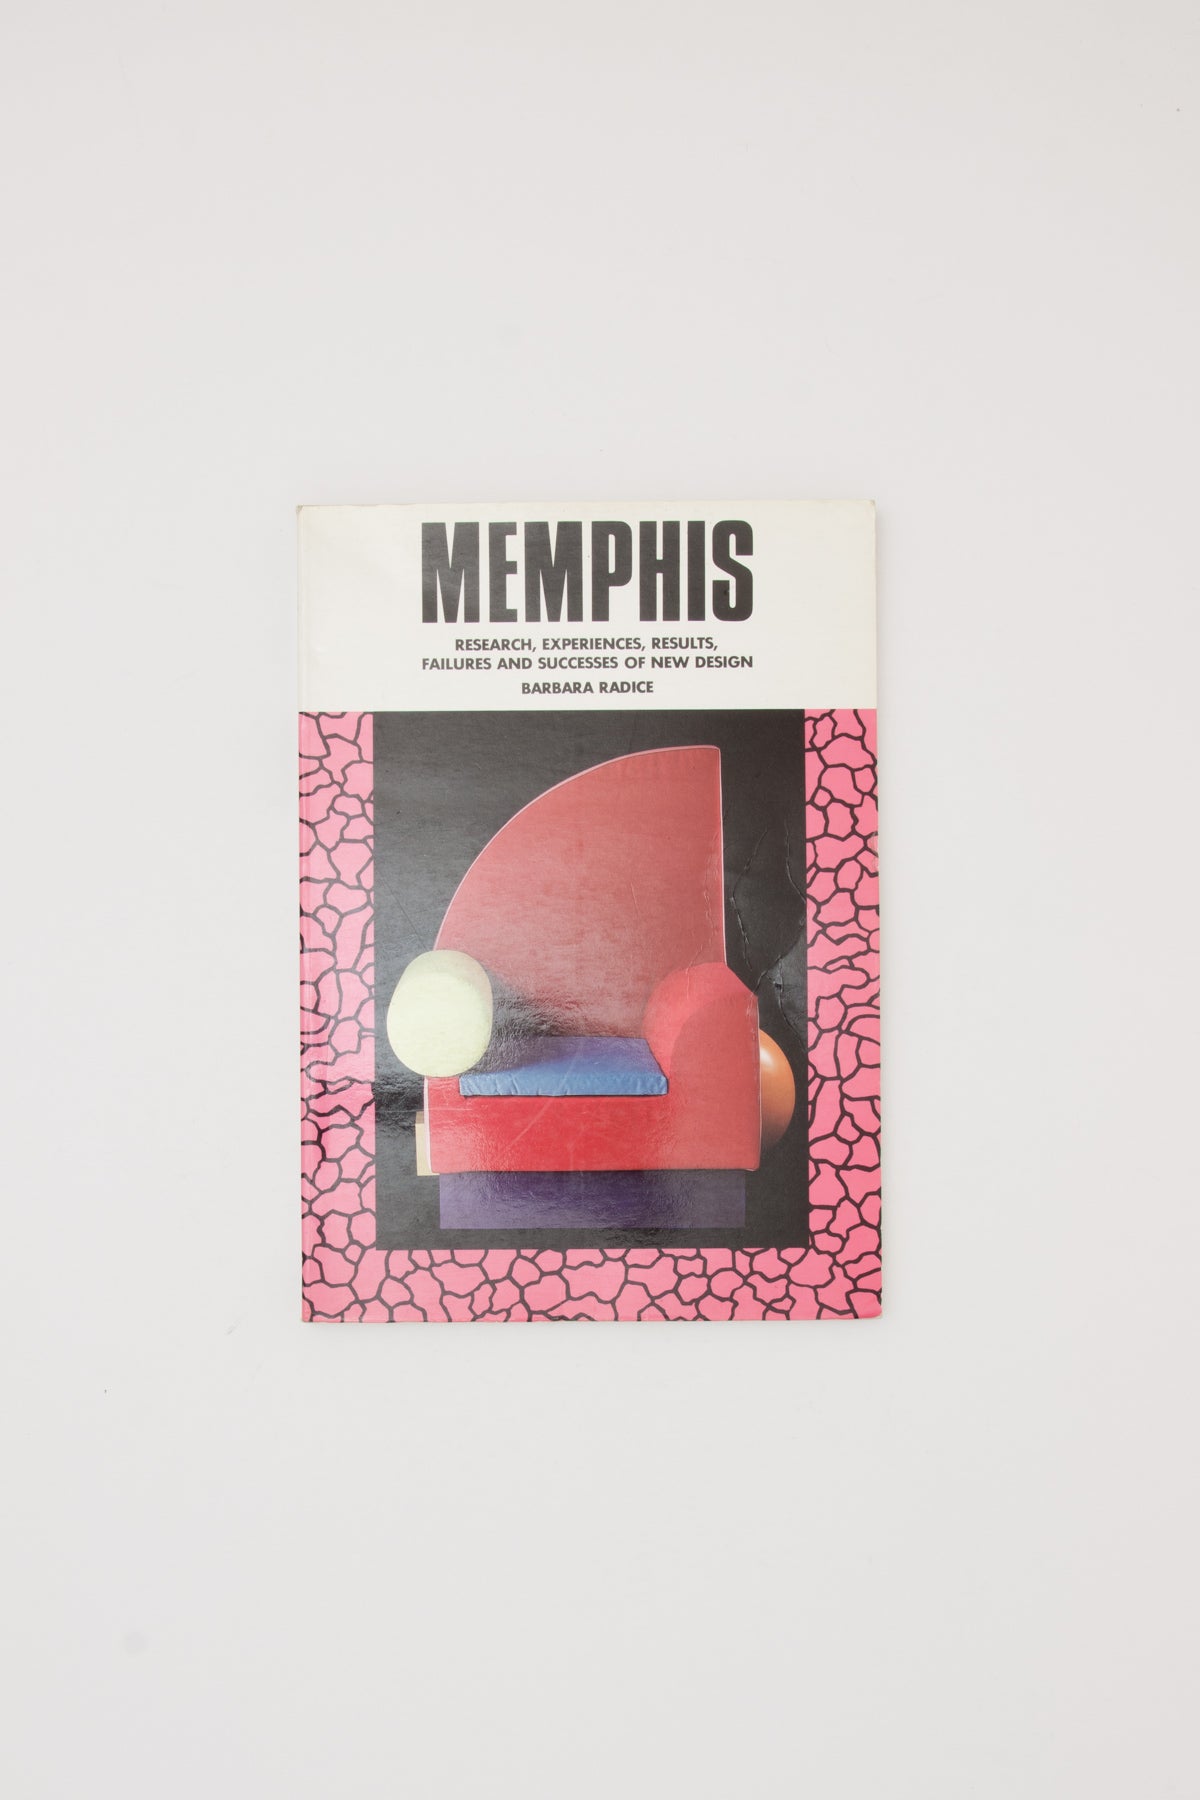 MEMPHIS. Research, Experiences, Results, Failures and Successes of New Design.  - Barbara Radice